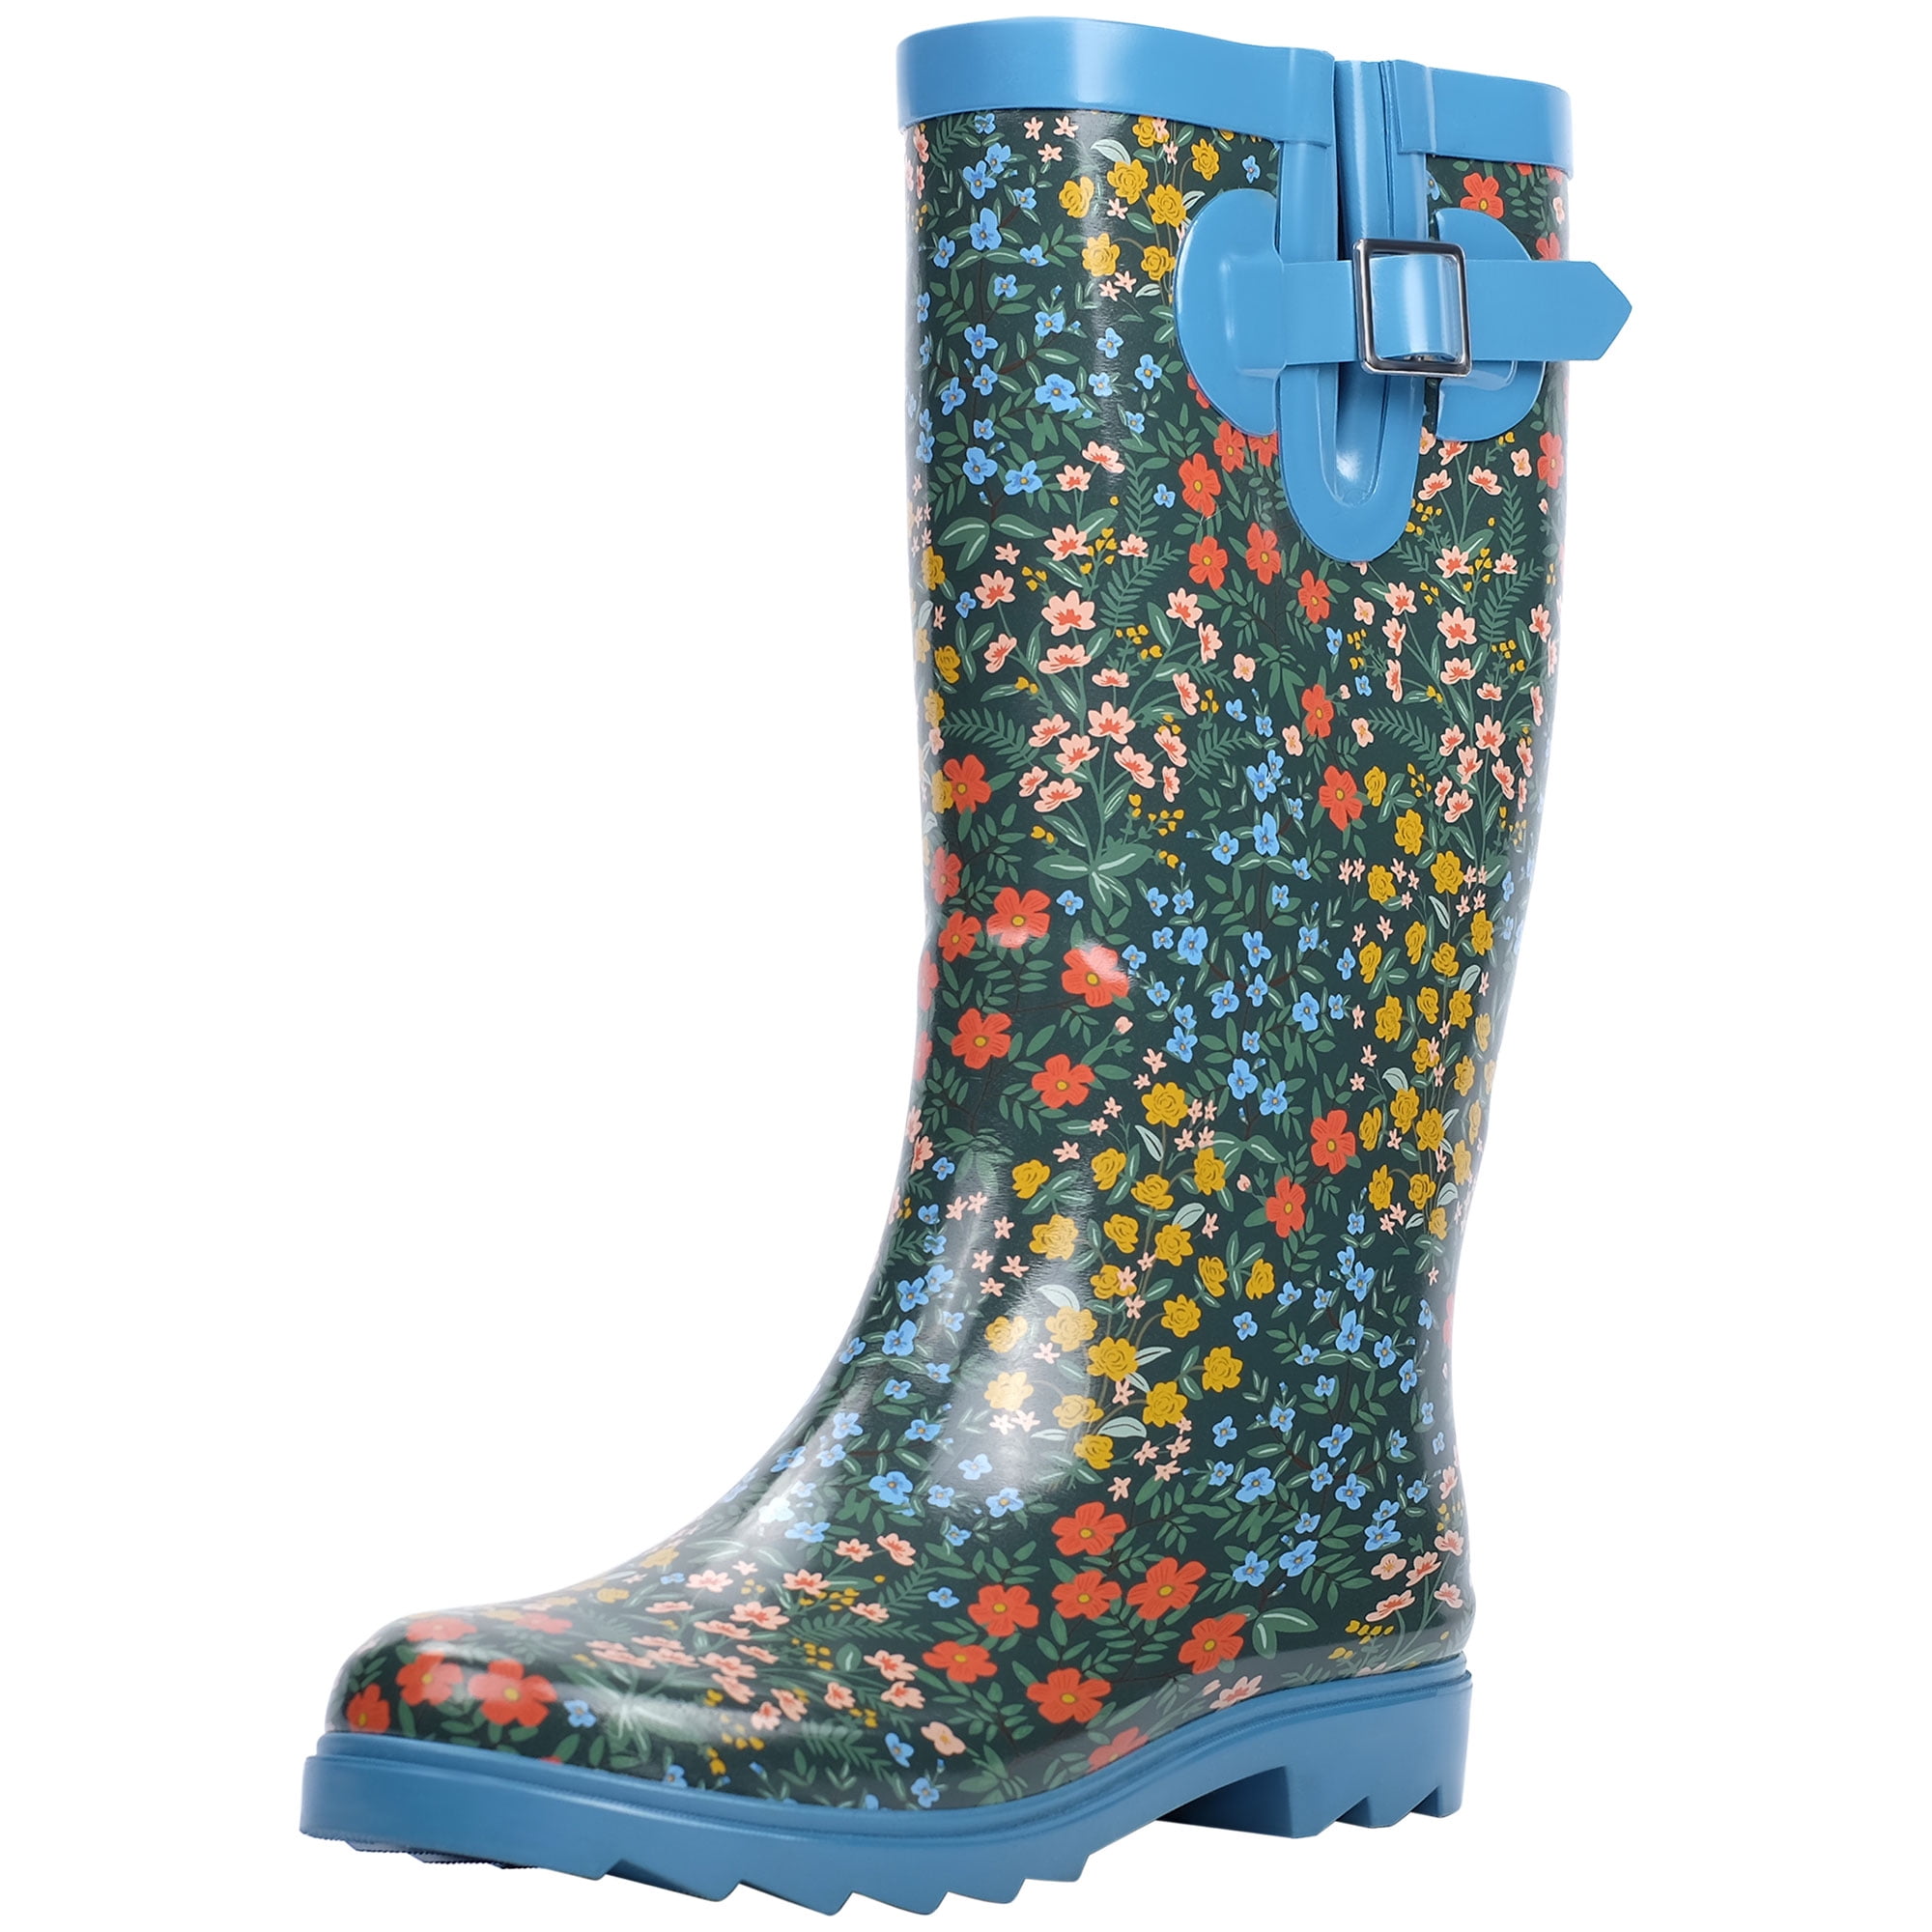 Landchief Rain Boots for Women, Ladies Tall Waterproof Rubber boots for ...